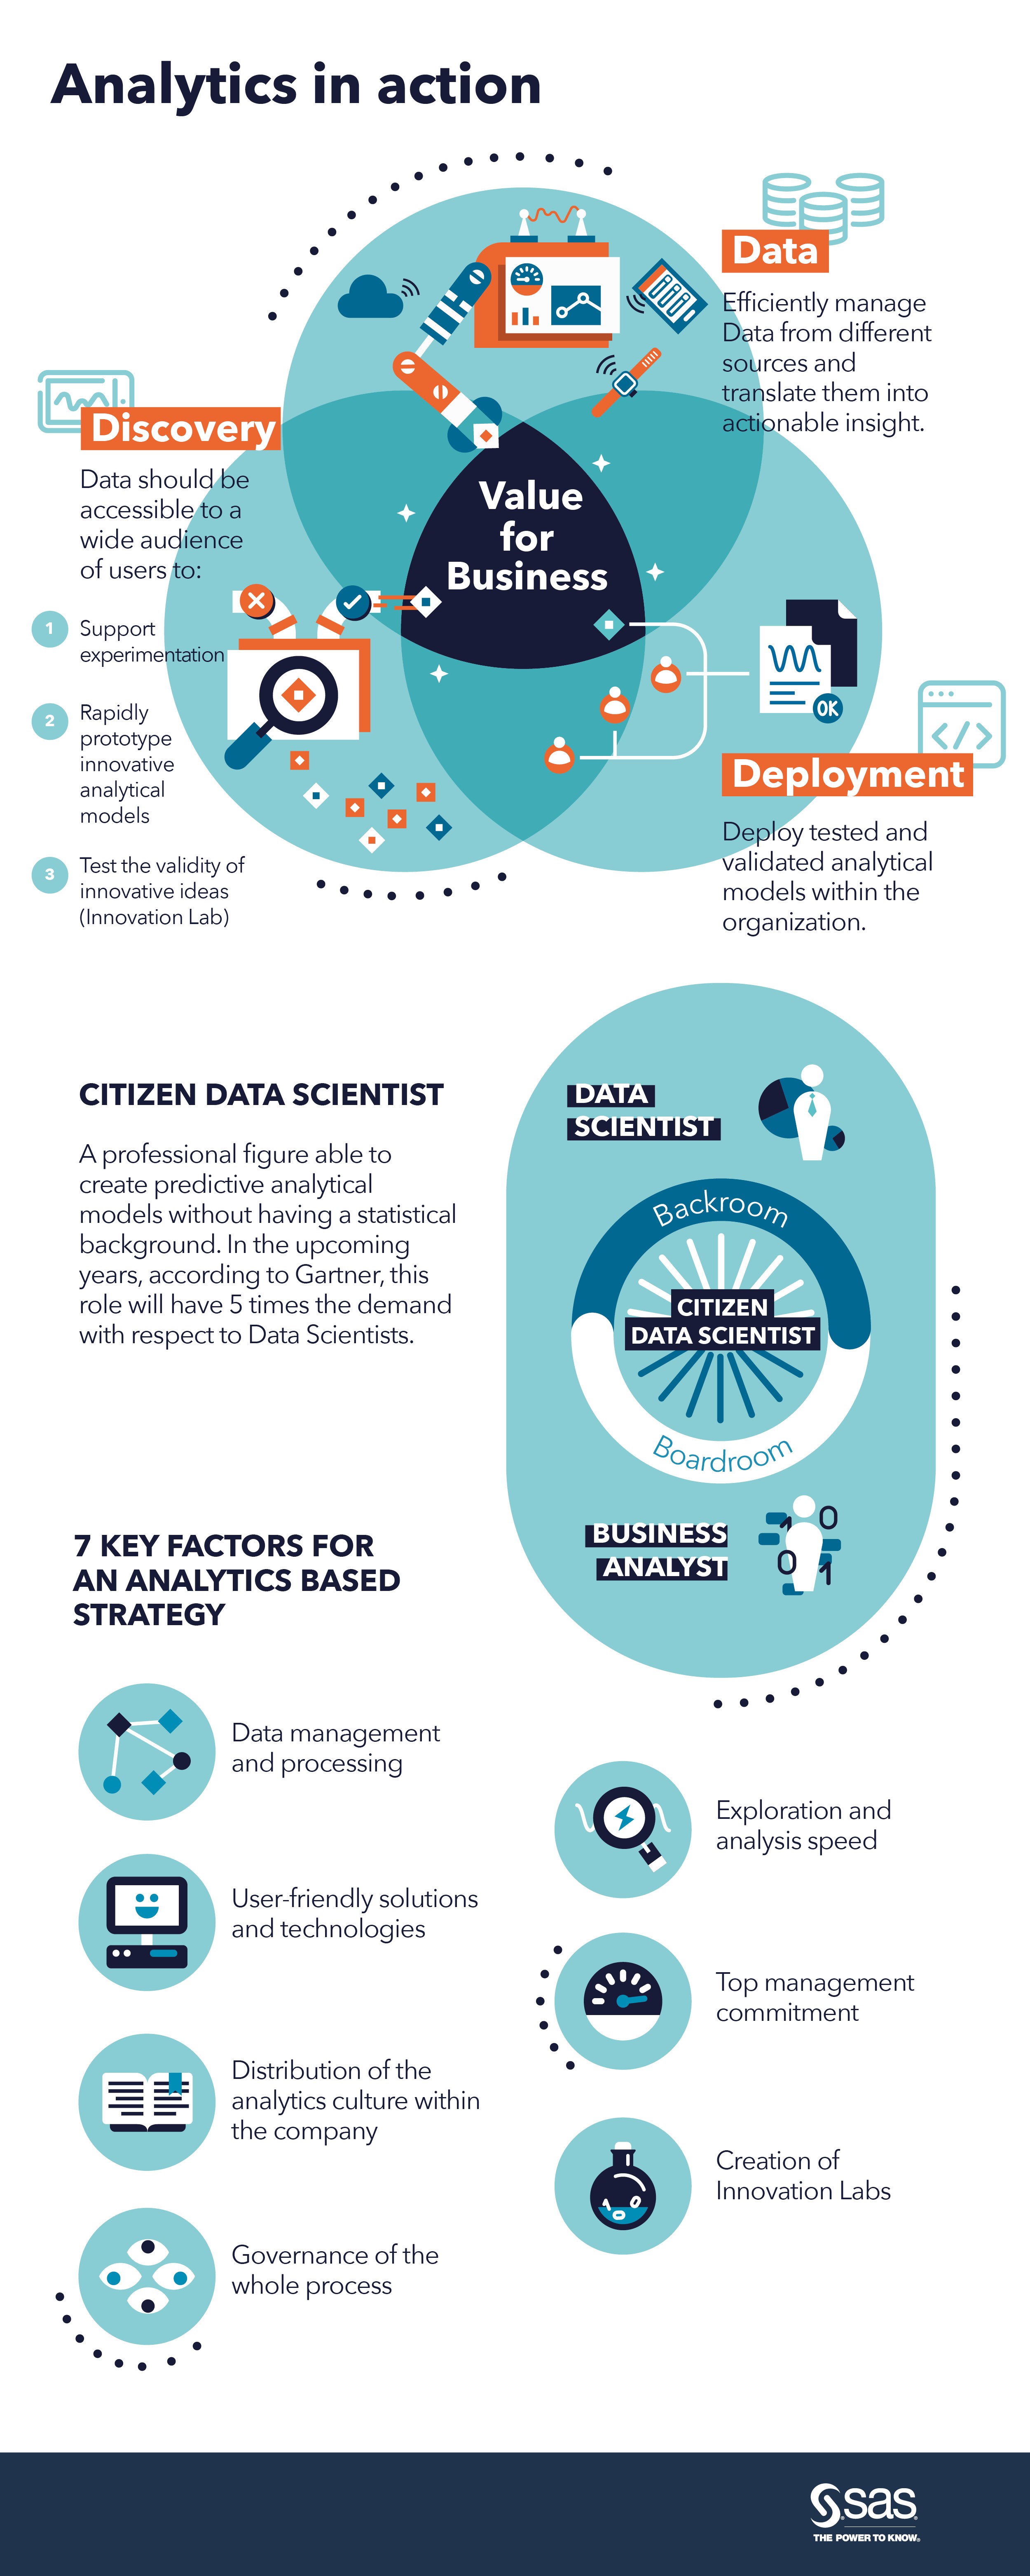 Analytics in Action - Infographic